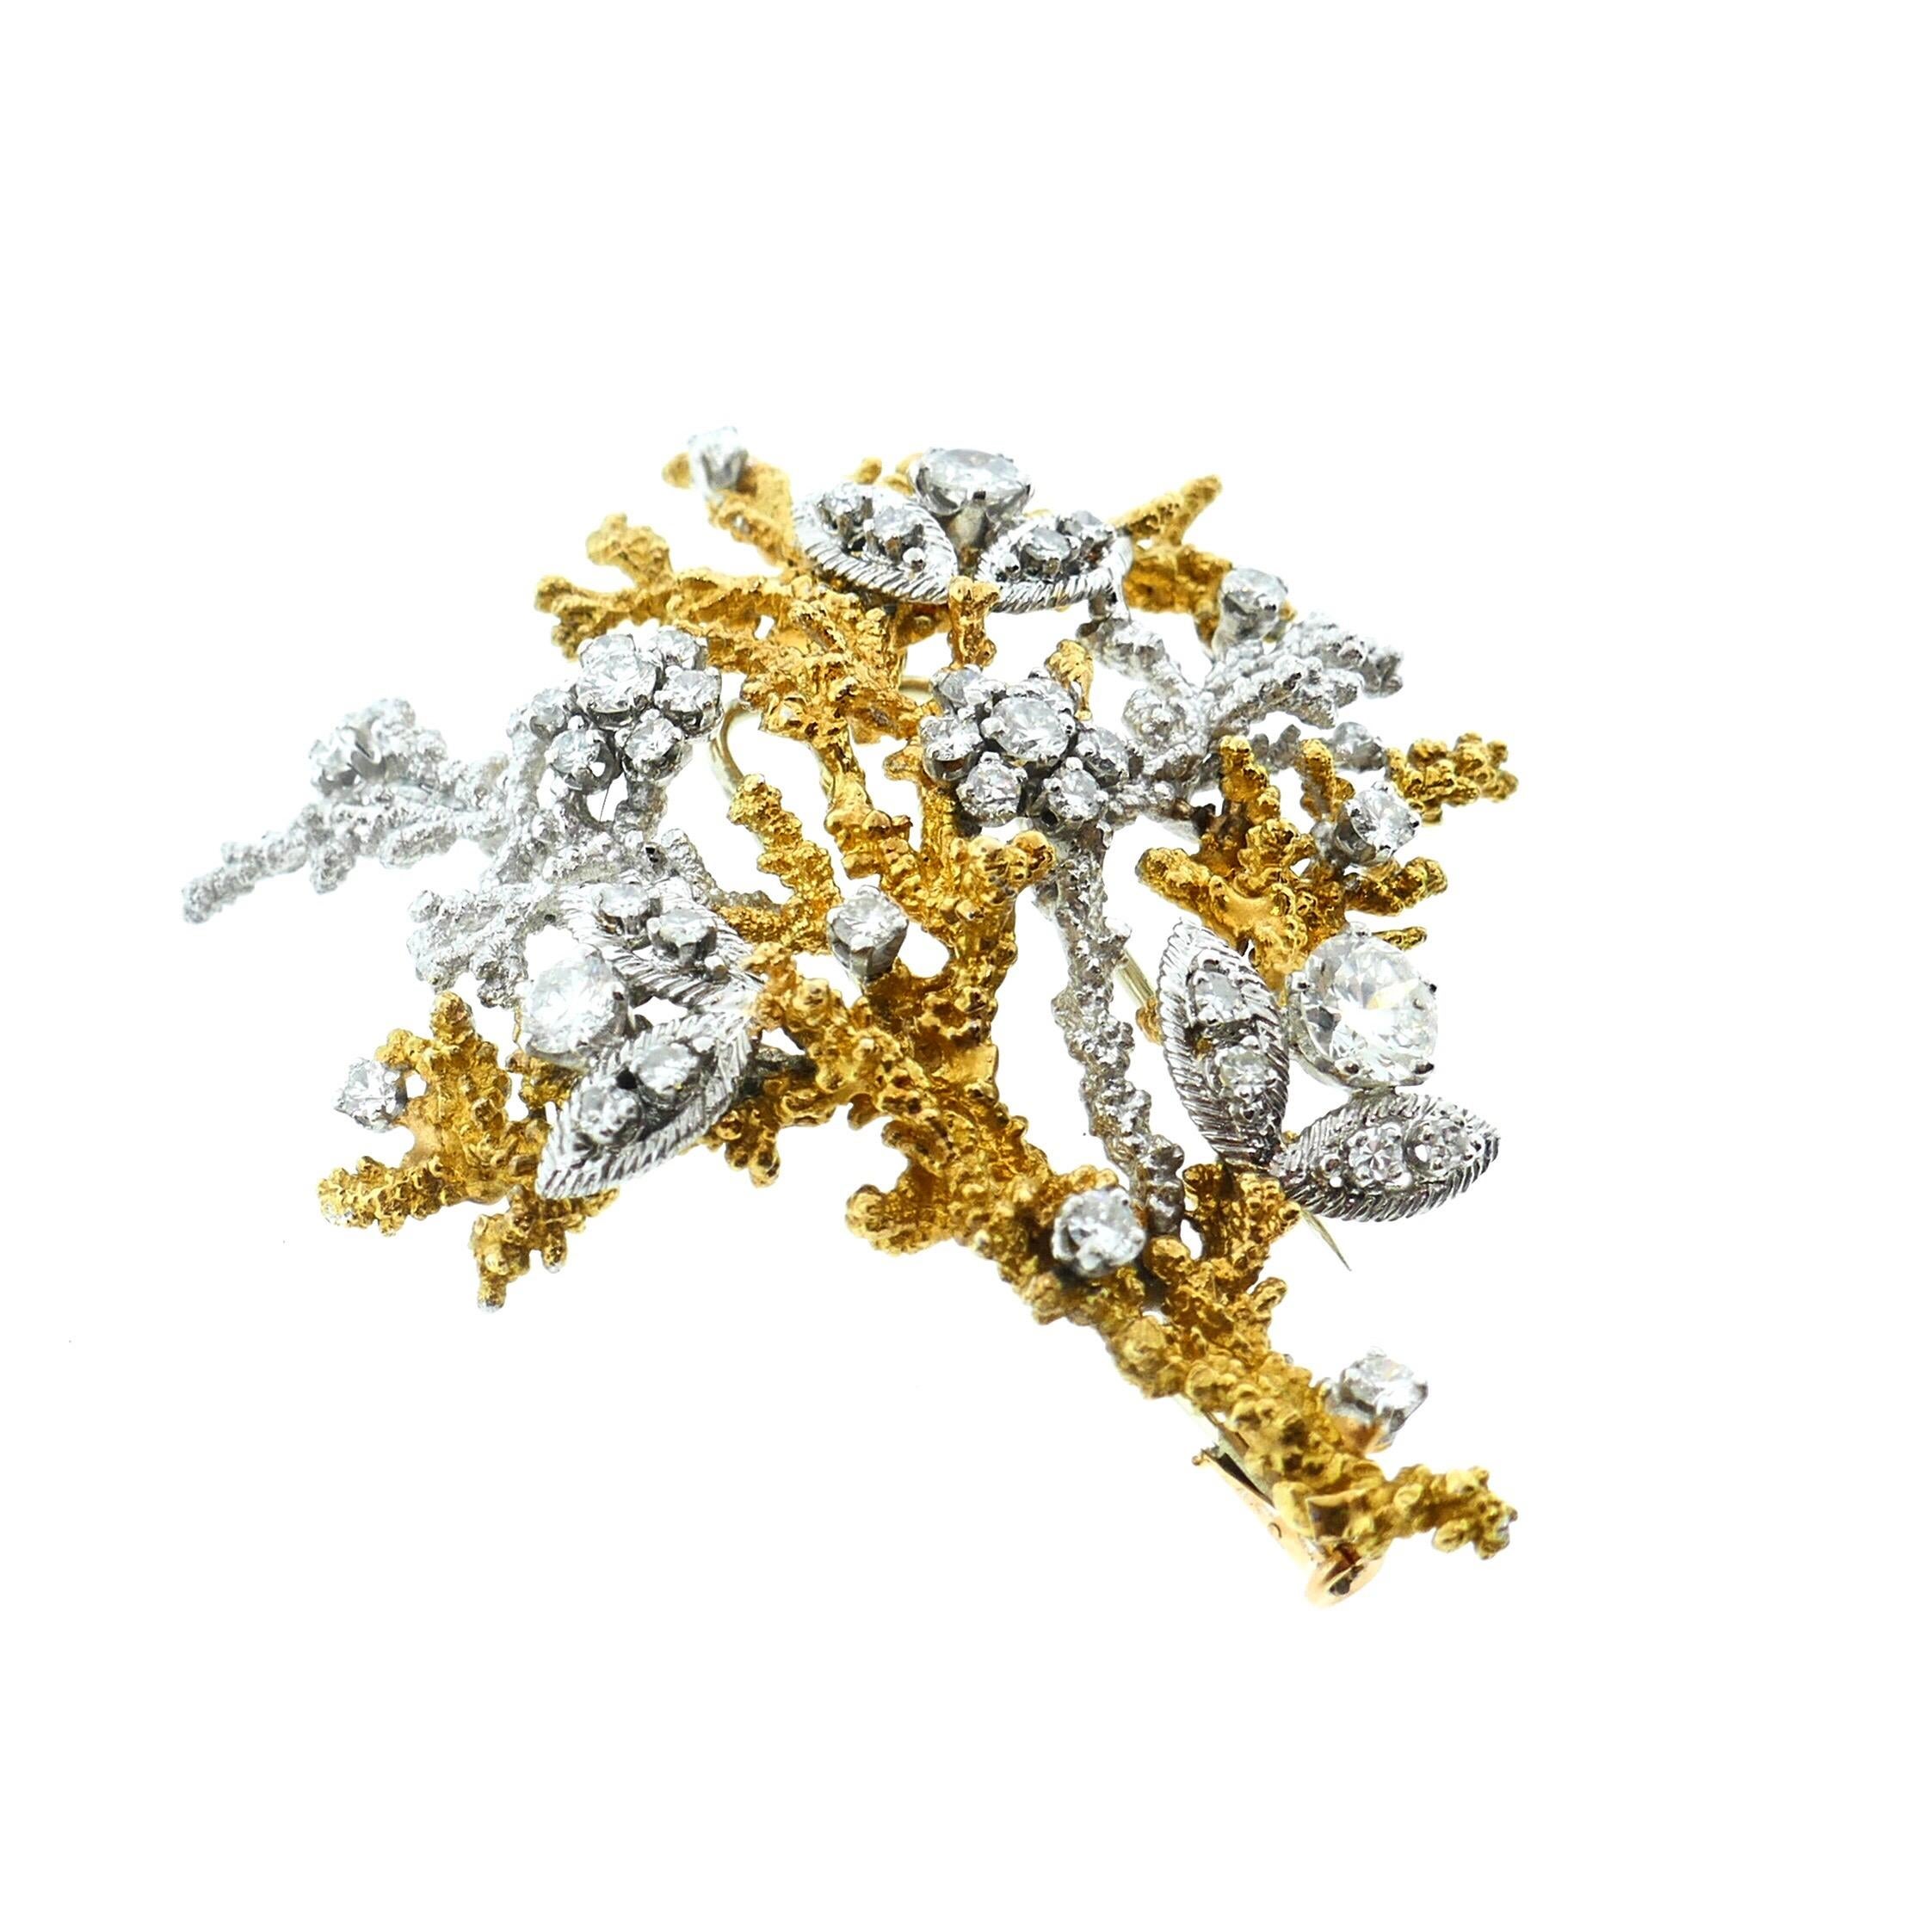 Georges L'Enfant French Yellow and White Gold Diamond Tree Of Life Brooch

This is a magnificent Georges L'Enfant brooch. It features beautifully textured 18k yellow and white gold and roughly two carats of excellent quality diamonds. Very rare and